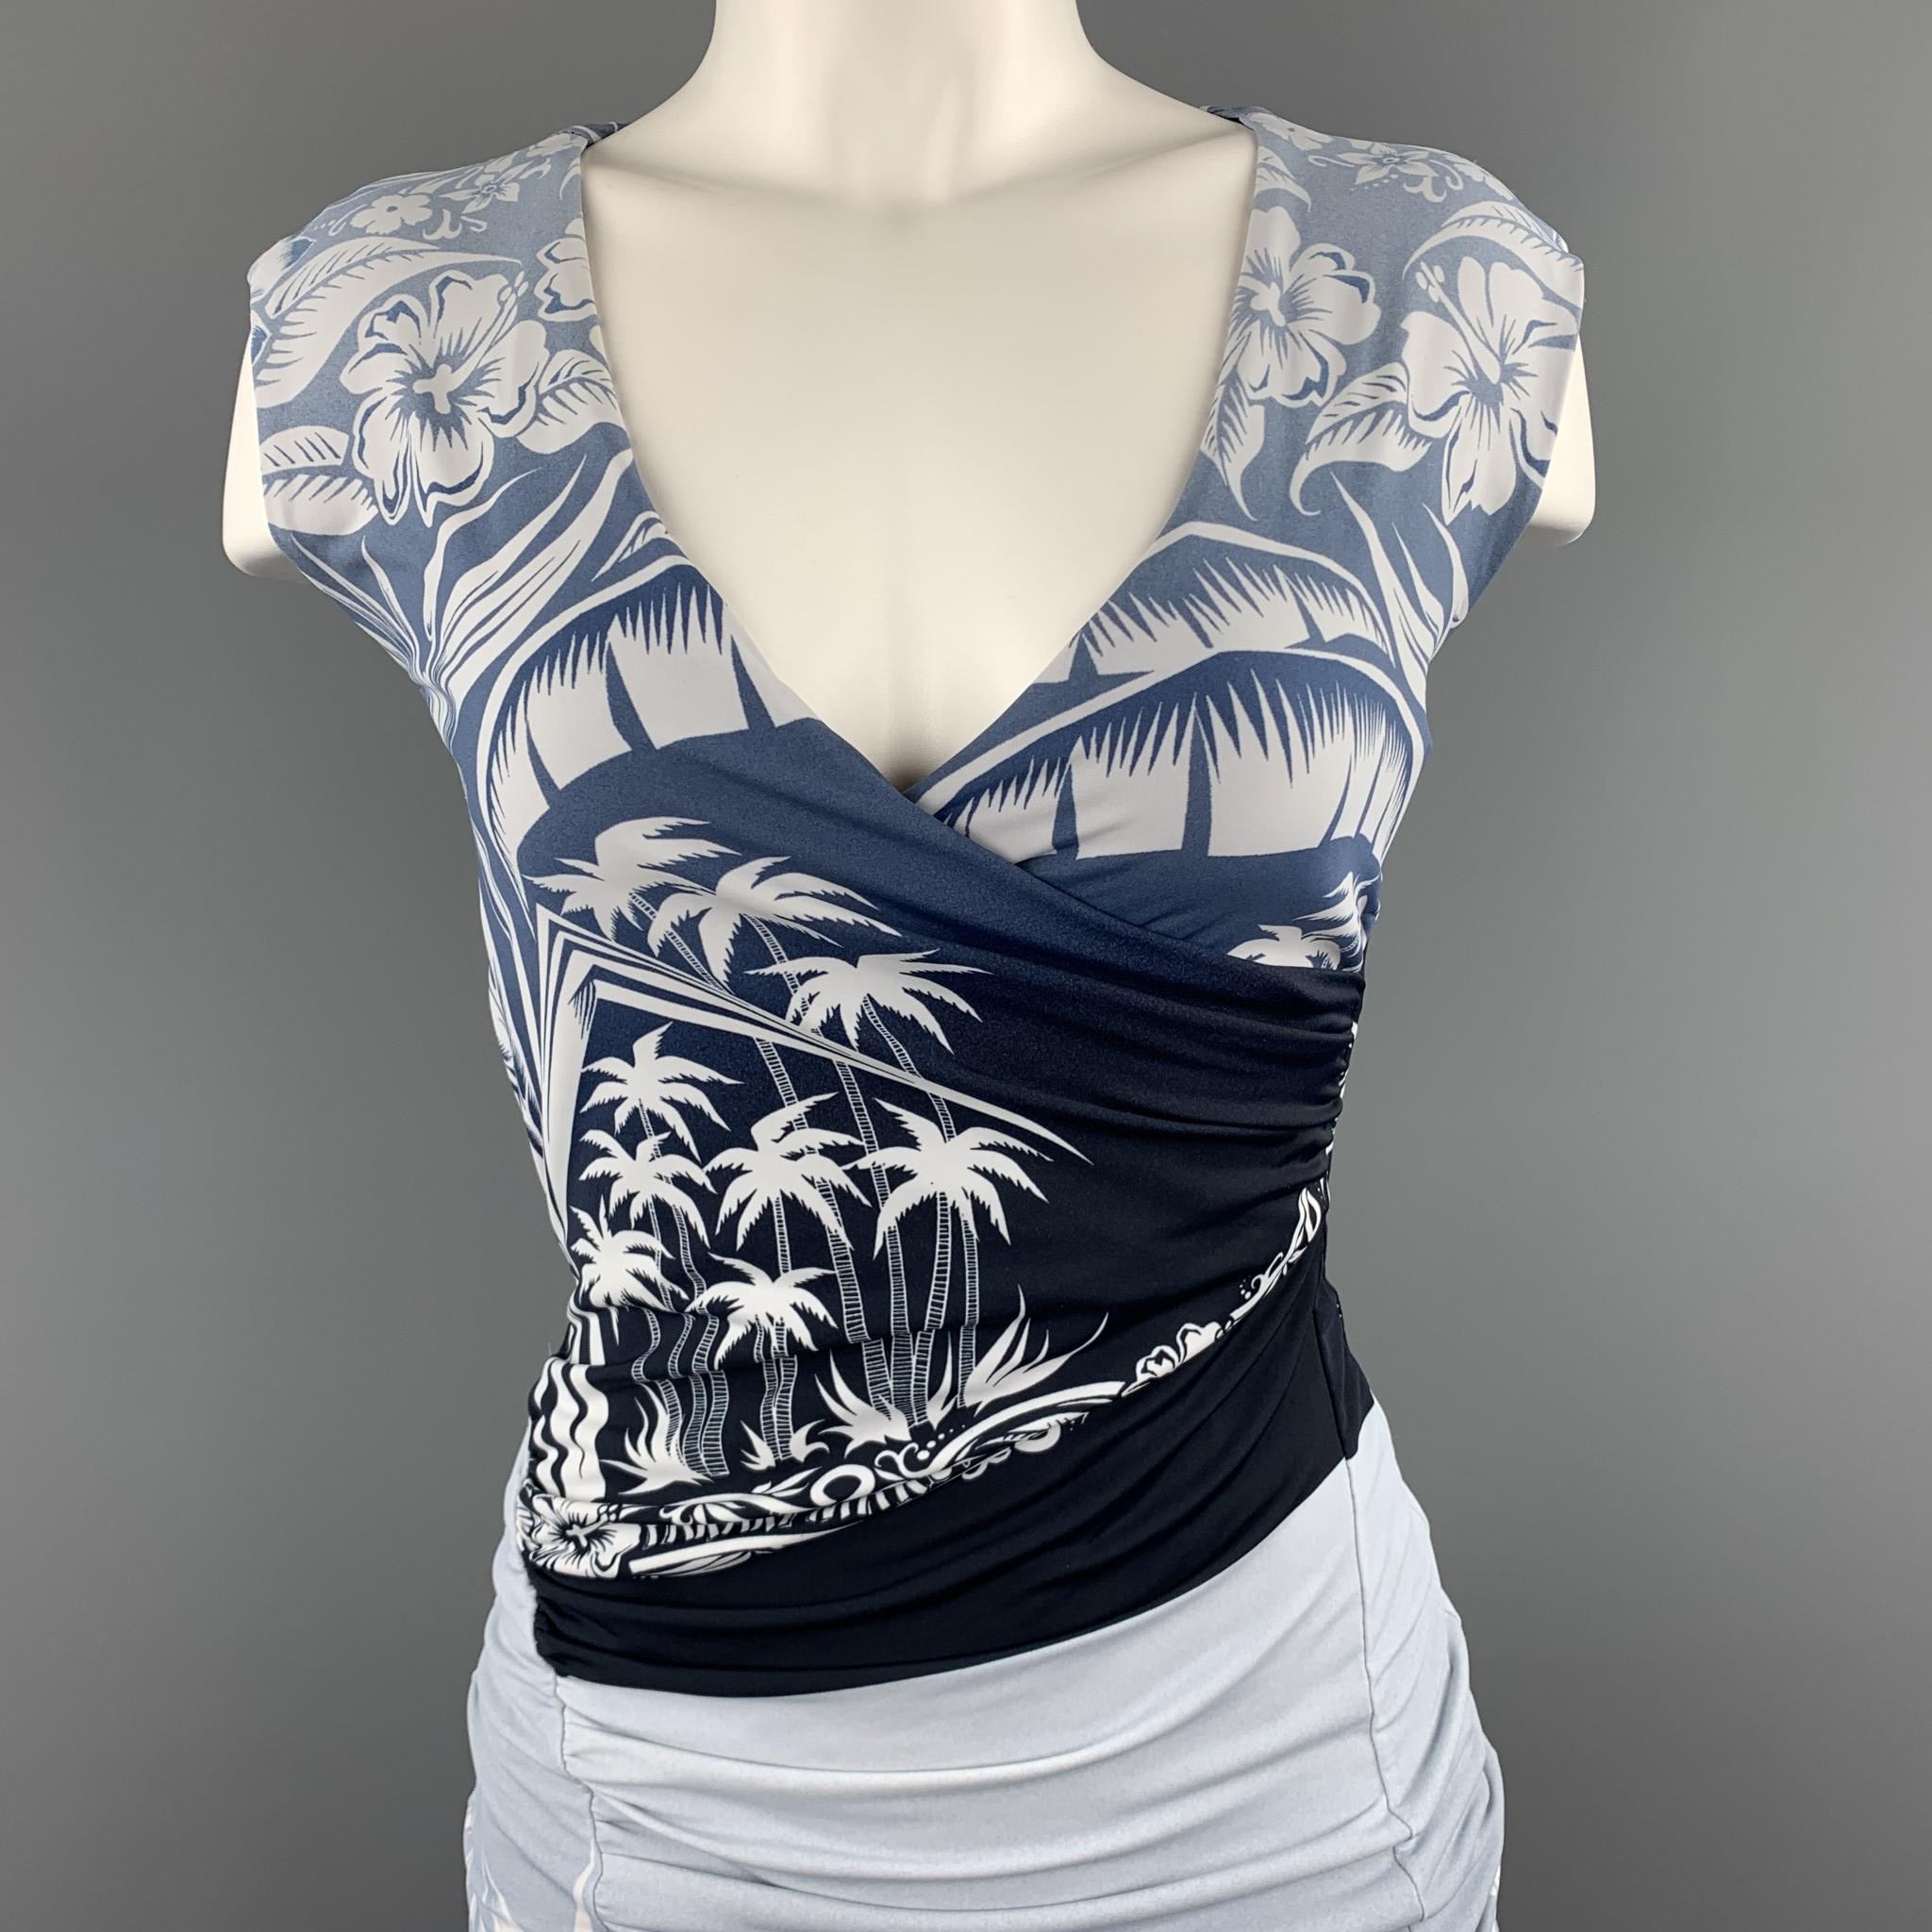 JEAN PAUL GAULTIER shift dress comes in a blue ombre tropical pattern jersey with a wrapped drape V neck and signature tab back. Made in Italy.

Excellent Pre-Owned Condition.
Marked: S

Measurements:

Shoulder: 15 in.
Bust:  34 in.
Waist: 26